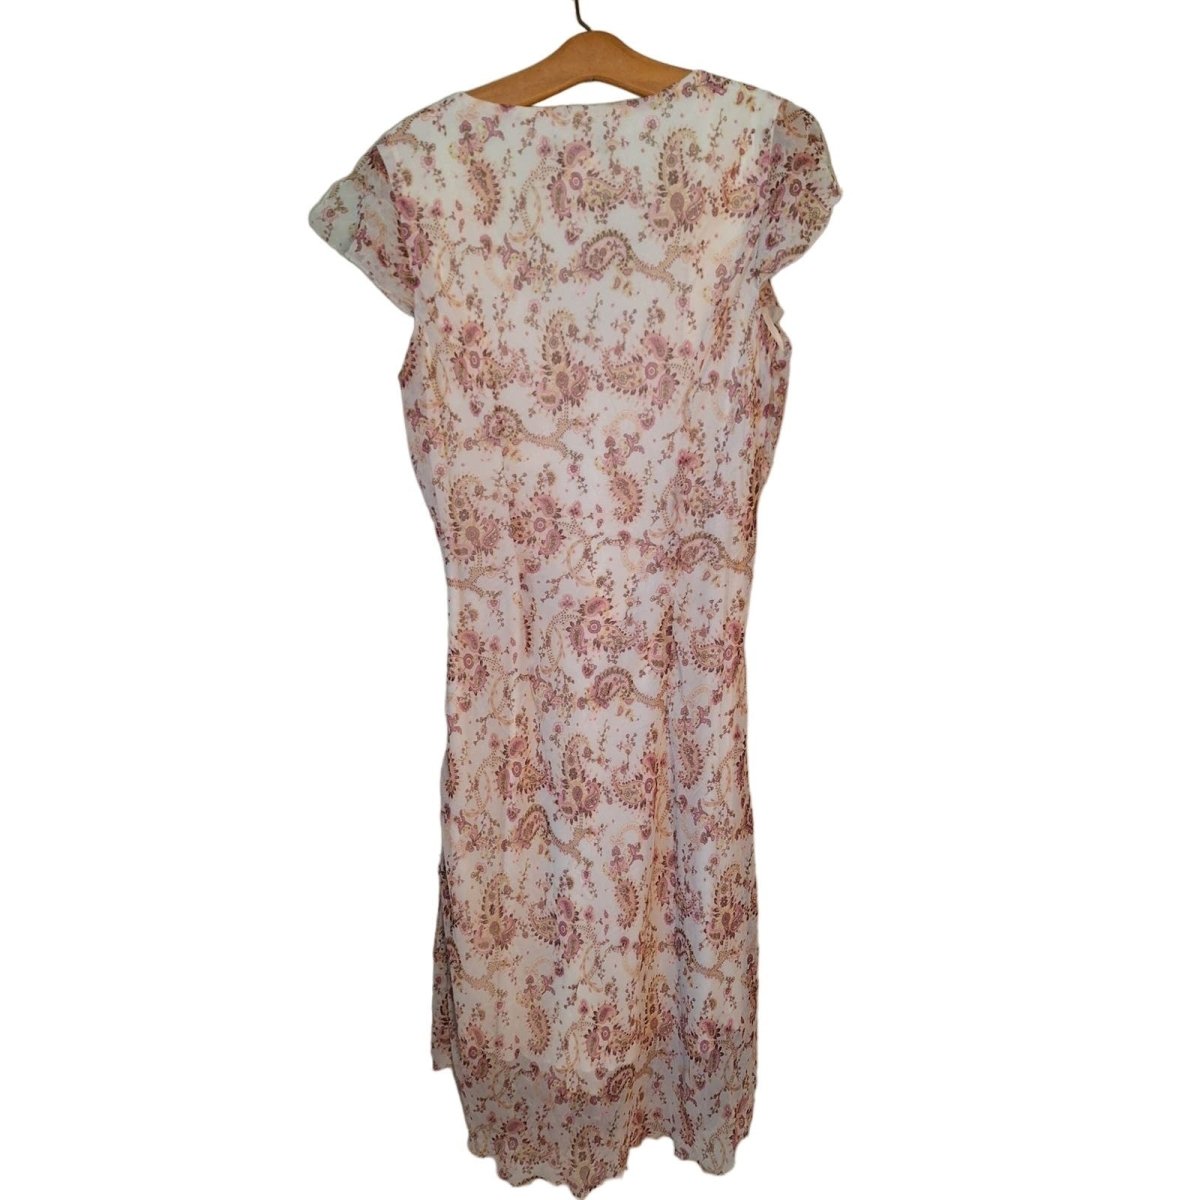 Vintage 90s/Y2K Cream & Pink Paisley Sheer Layer Midi Dress Women Size 14 L/XL - themallvintage The Mall Vintage